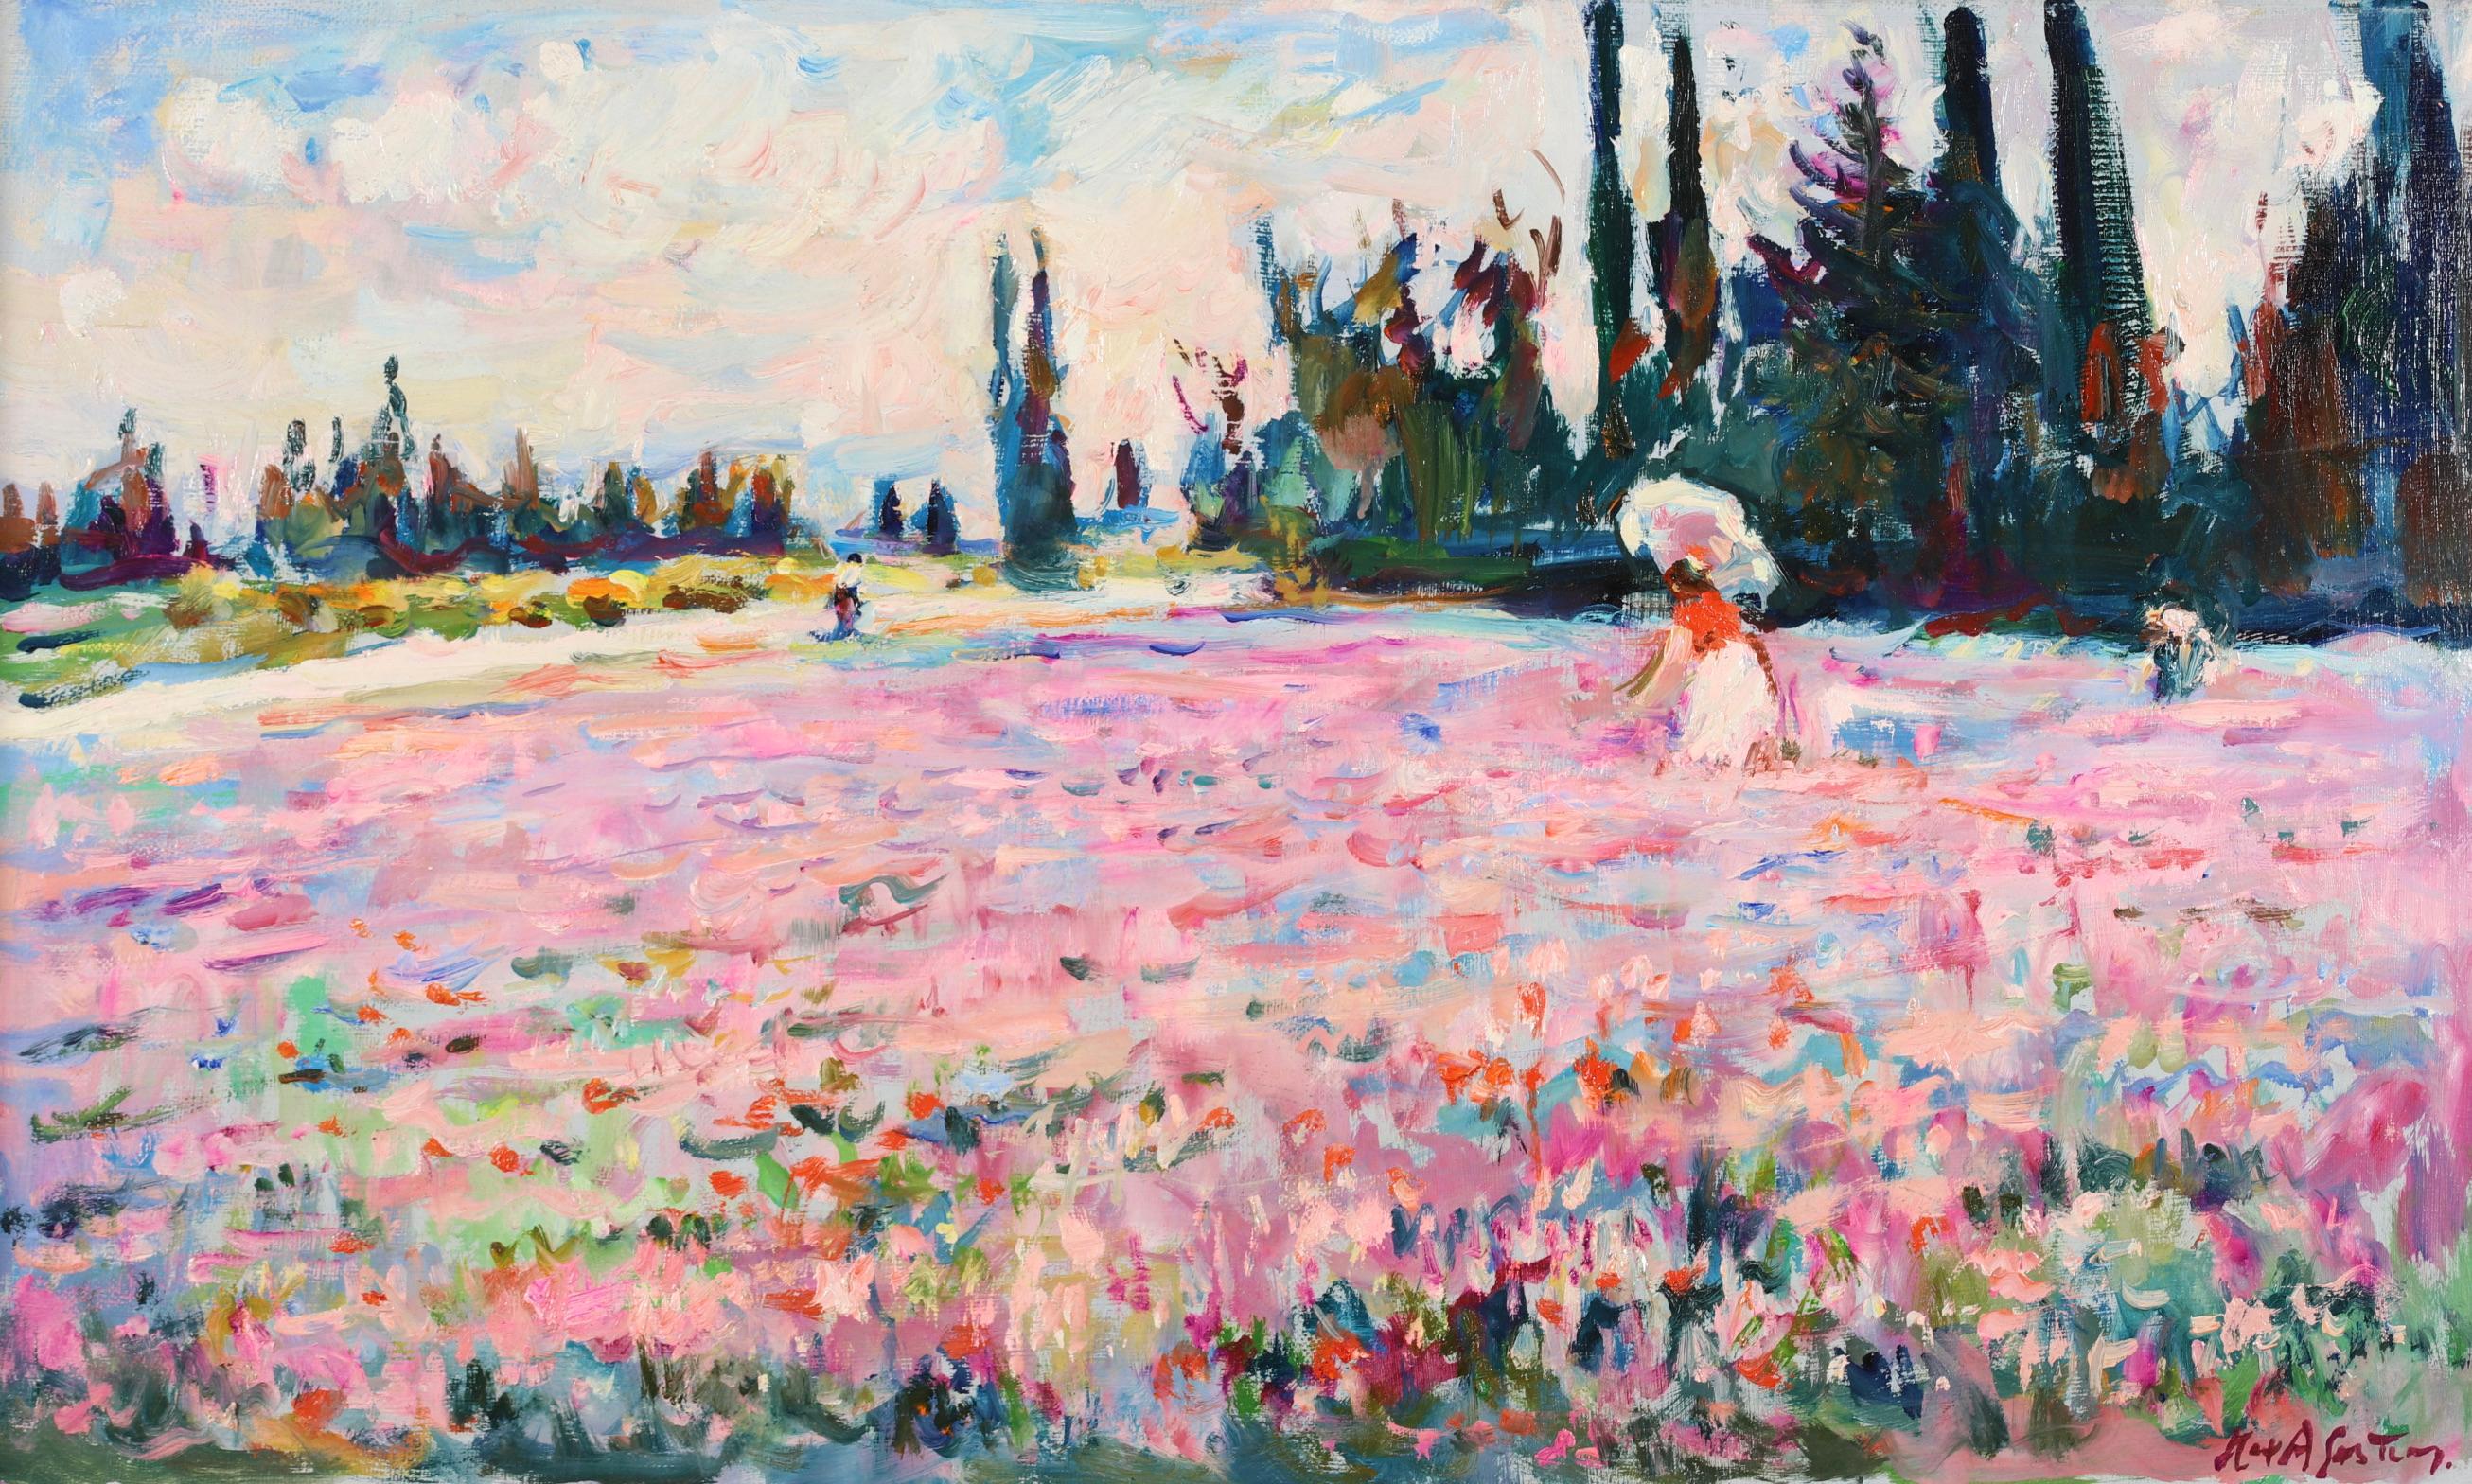 Signed post impressionist oil on canvas landscape circa 1980 by French painter Max Michel Agostini. The work depicts a field with the most beautifully coloured wildflowers in shades of pinks and blues. In the centre of the field a woman shades from